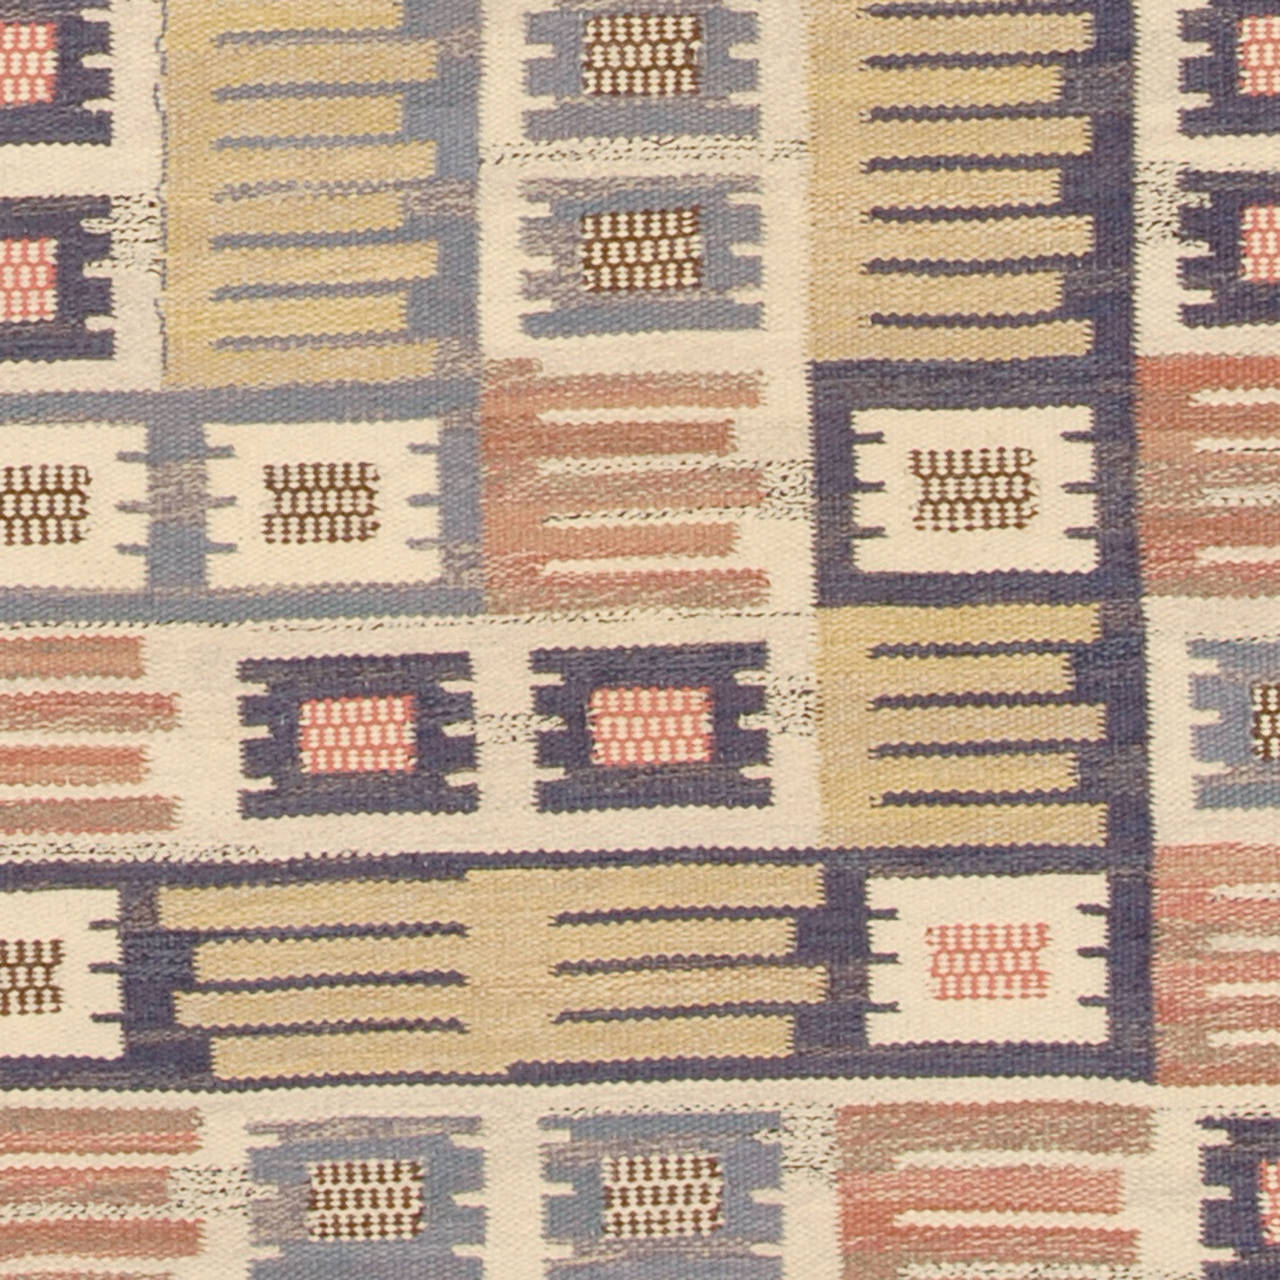 20th Century Swedish Flat-Weave Carpet by Märta Måås-Fjetterström In Excellent Condition For Sale In New York, NY